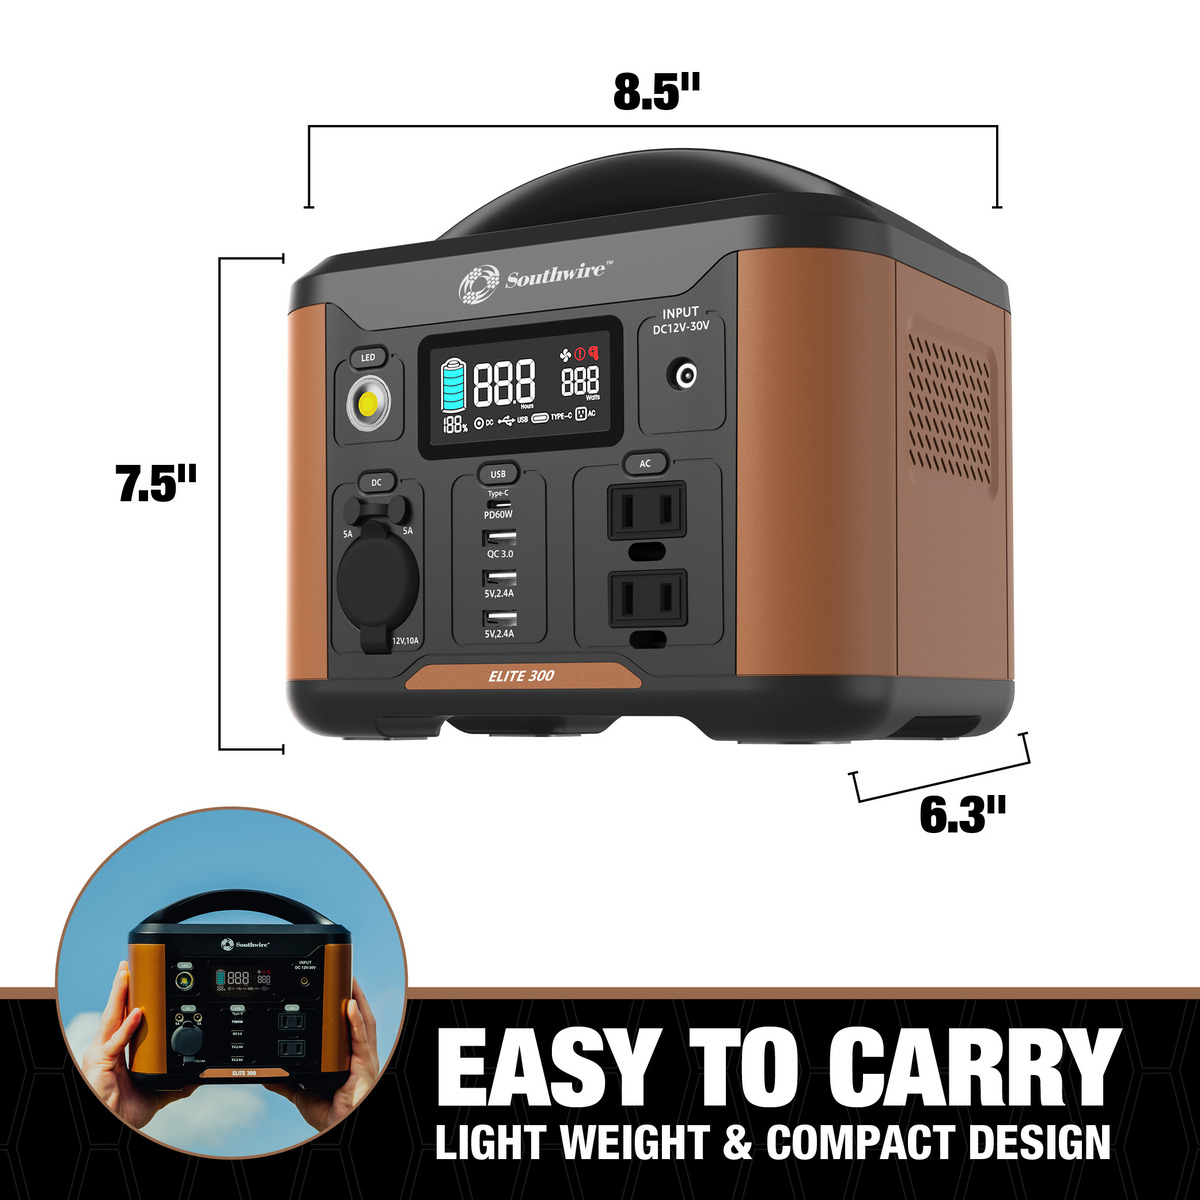 PORTABLE POWER STATION 300 WITH 296 WATT-HOURS OF POWER, FEATURES PURE SINE WAVE, 4 USB PORTS, 2 AC OUTLETS, 12V DC OUTLET. MOLDED HANDLE AND 7.76 LBS